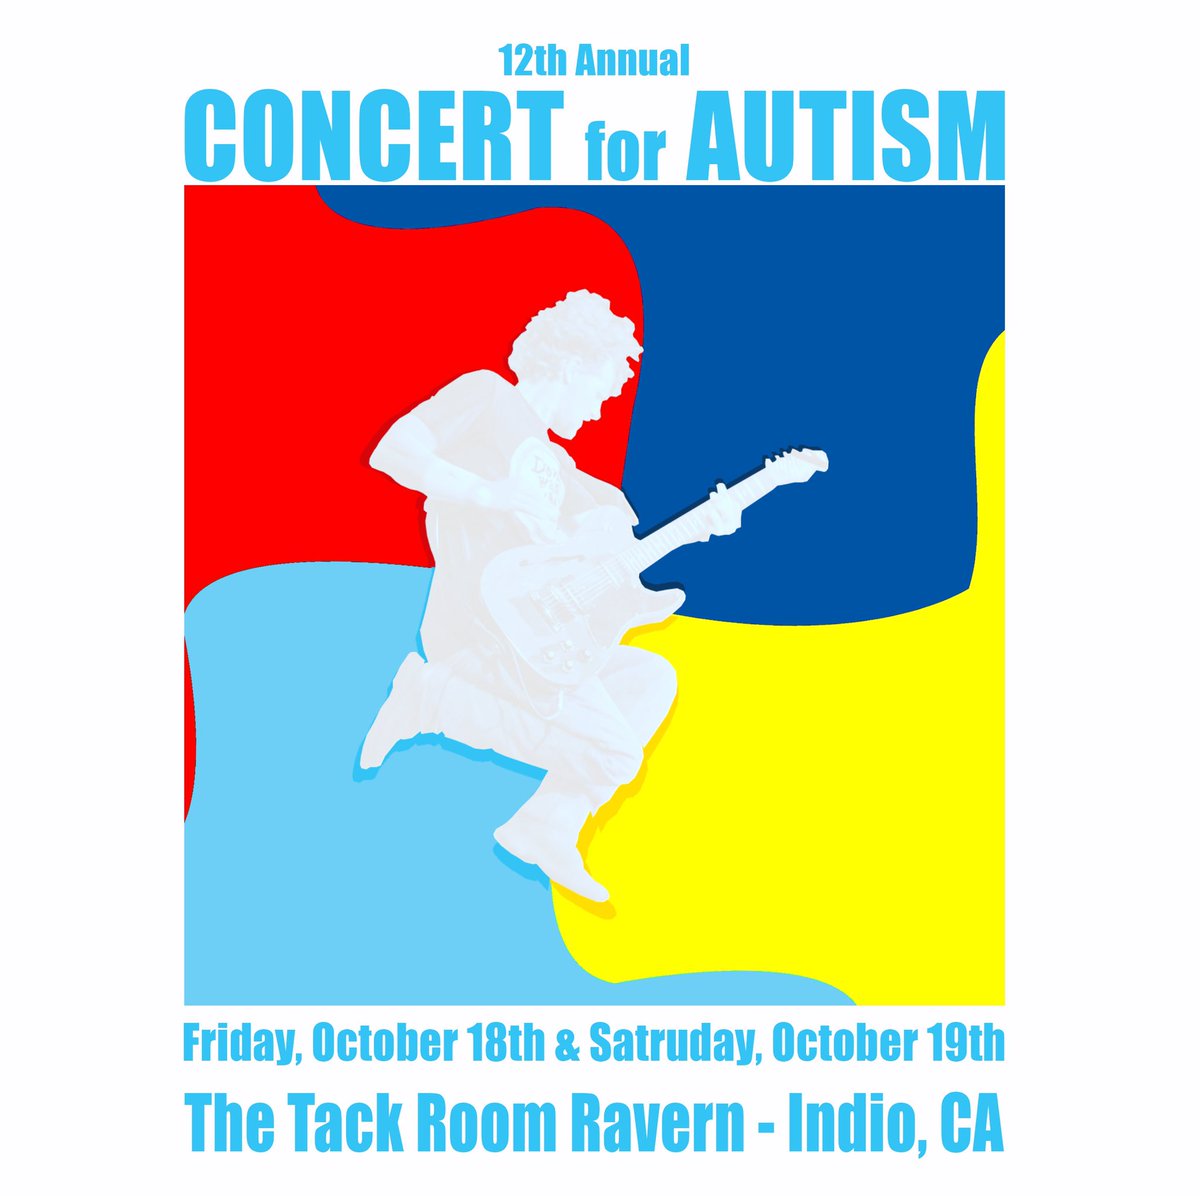 Happy to announce our 12th Annual Concert for Autism is taking place Friday, October 18th and Saturday, October 19th at @TackRoom_Tavern Details to come. Info at concertforautism.com #concertforautism #benefit #autism #desertautismfoumdation #CoachellaValley #AutismFamilies